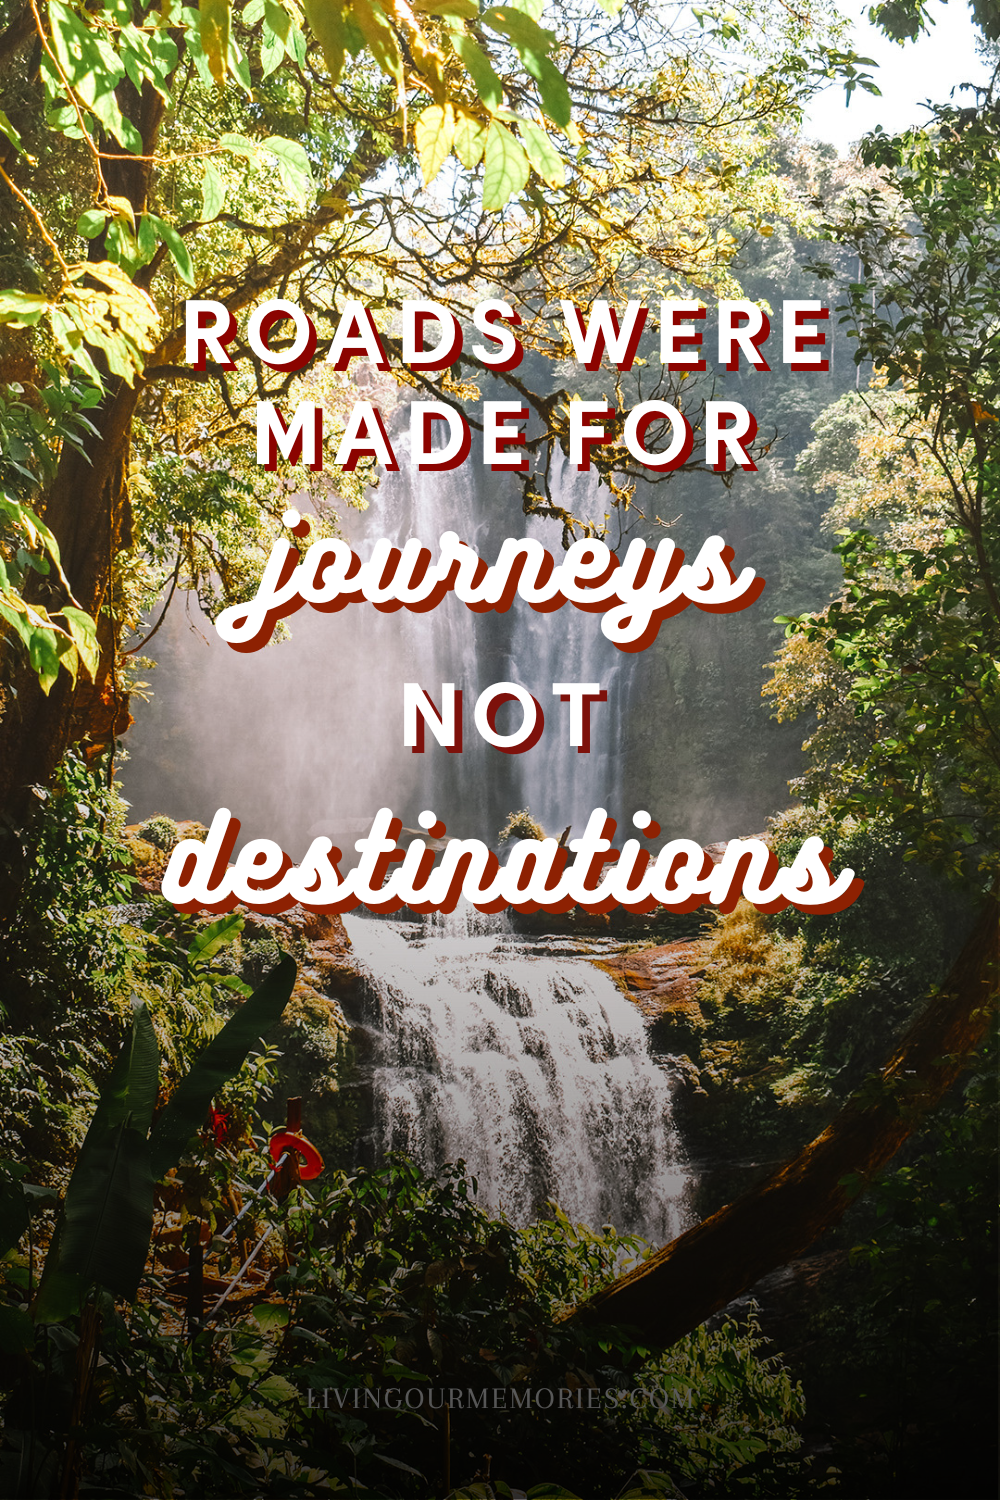 Roads were made for journeys not destinations